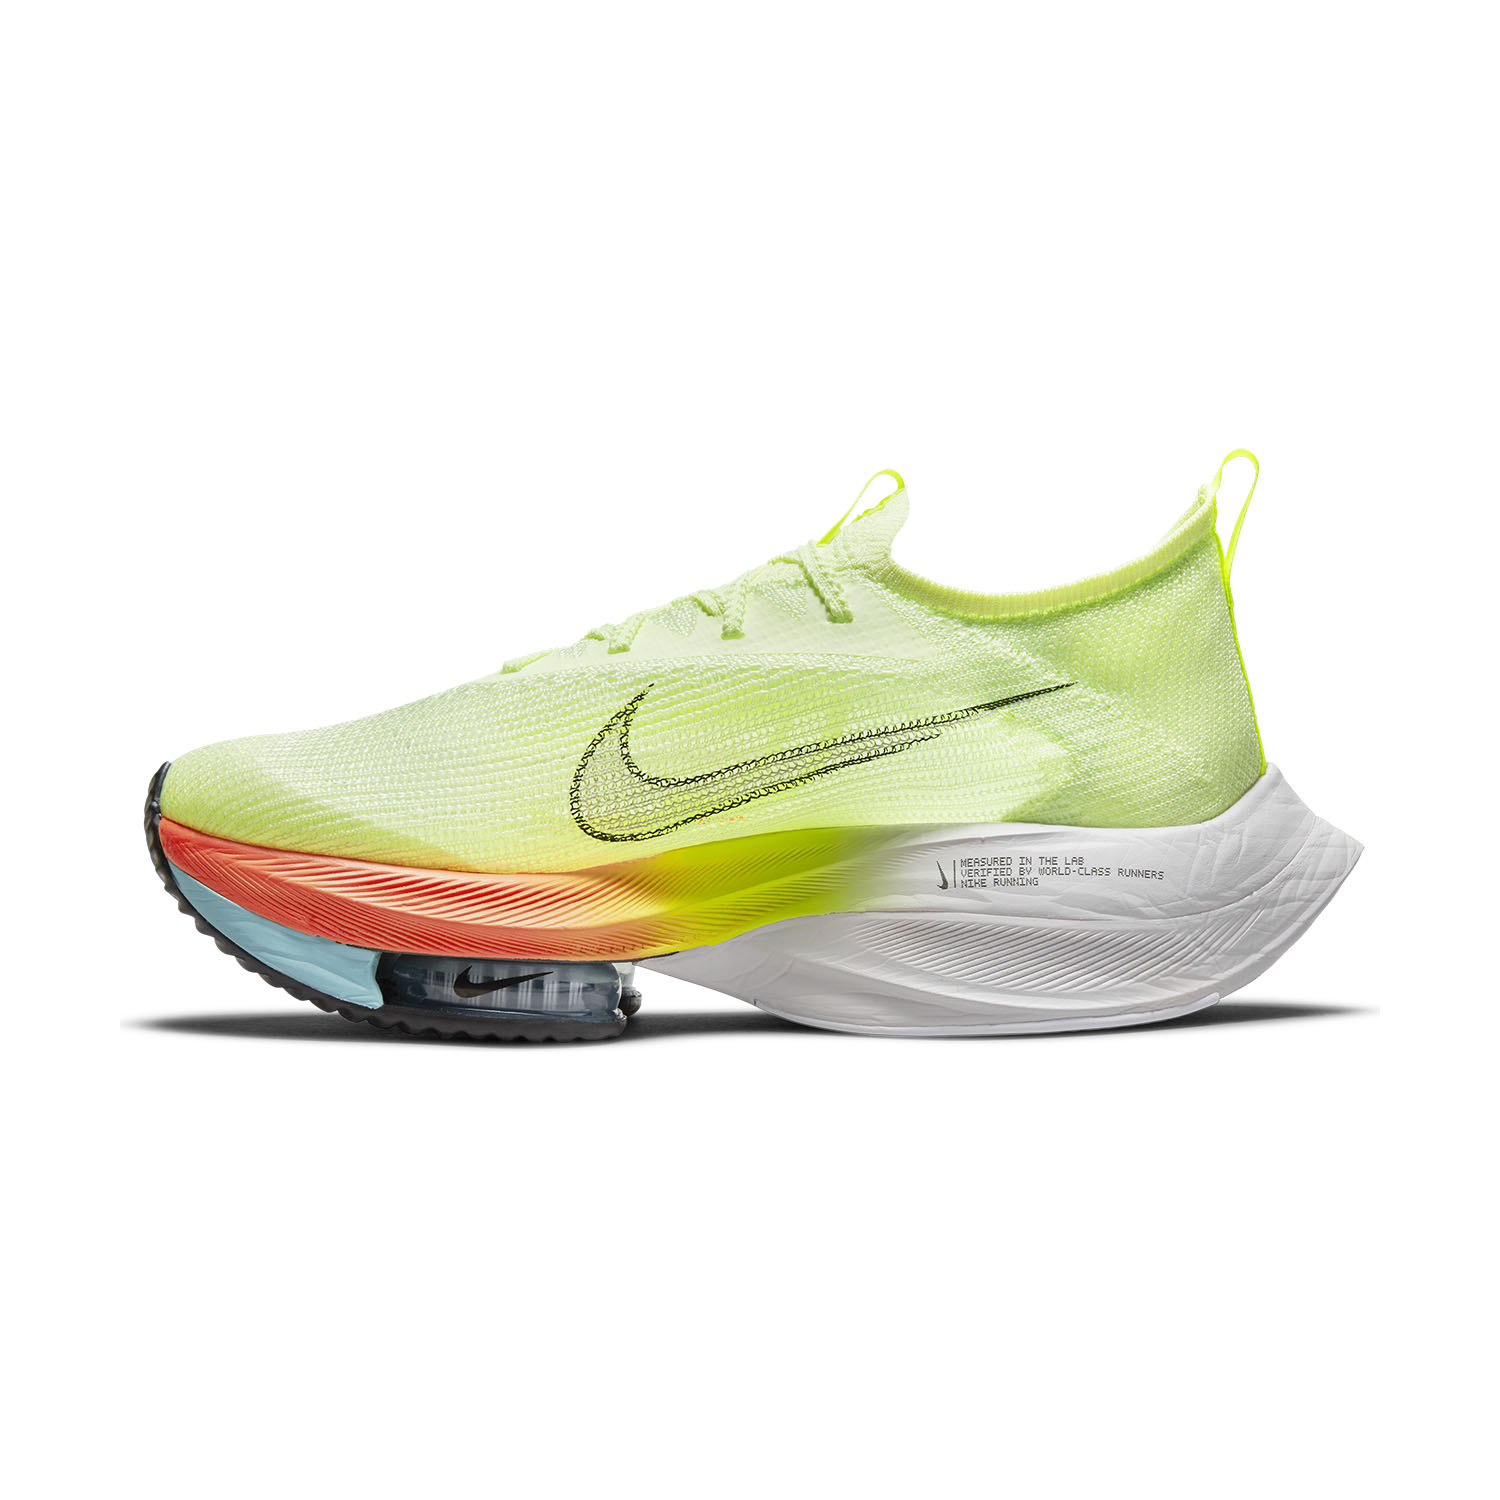 Nike Air Zoom Alphafly Next% Men's Running Shoes - Barely Volt